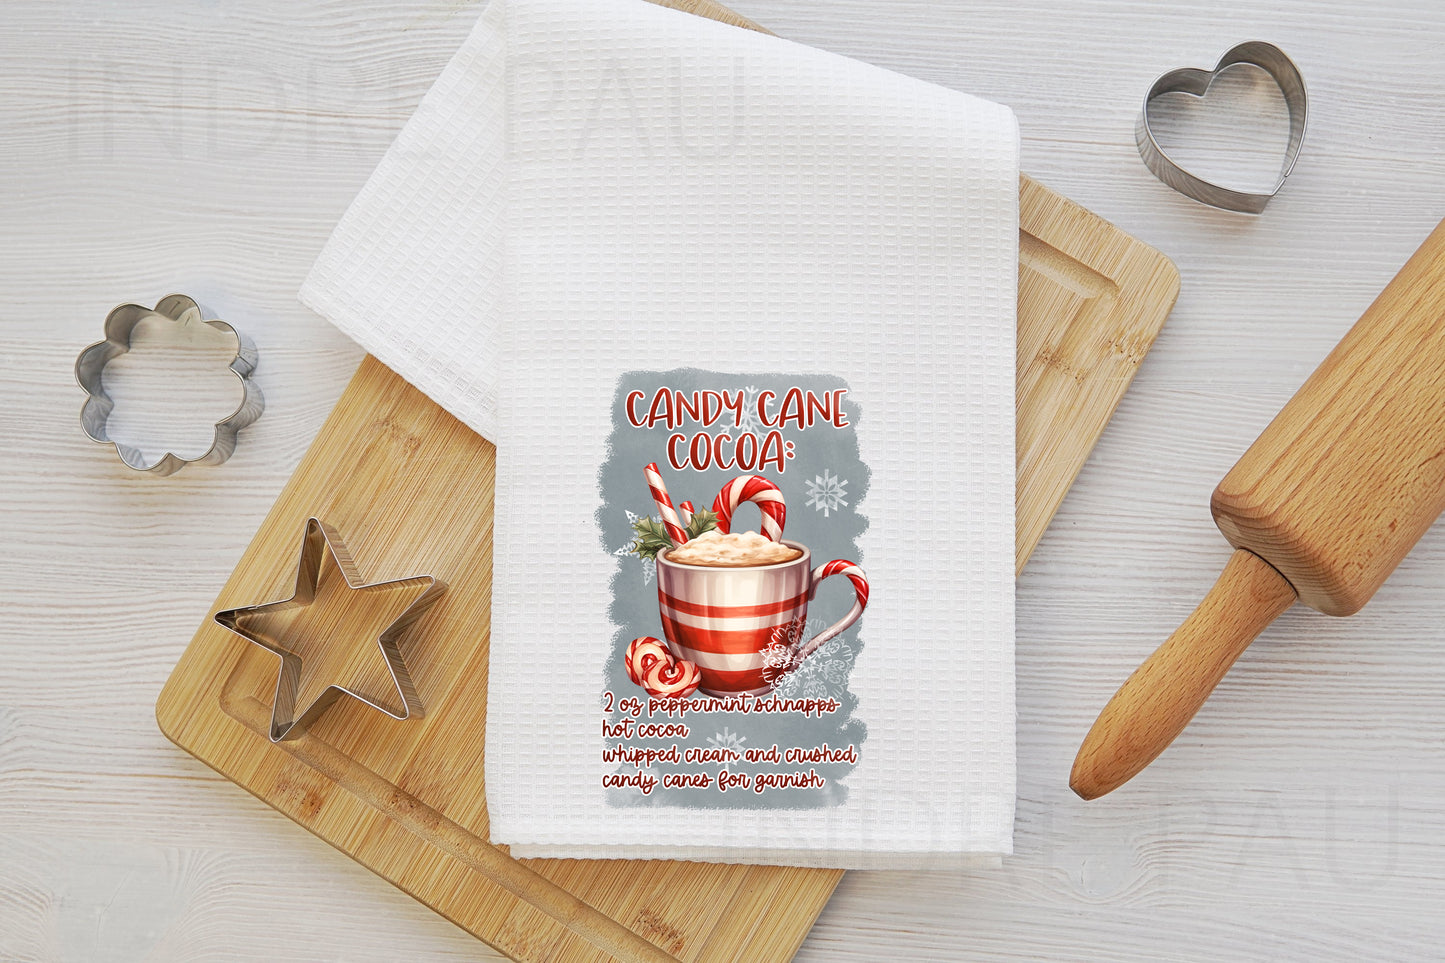 Candy Cane Cocoa Hand Towel